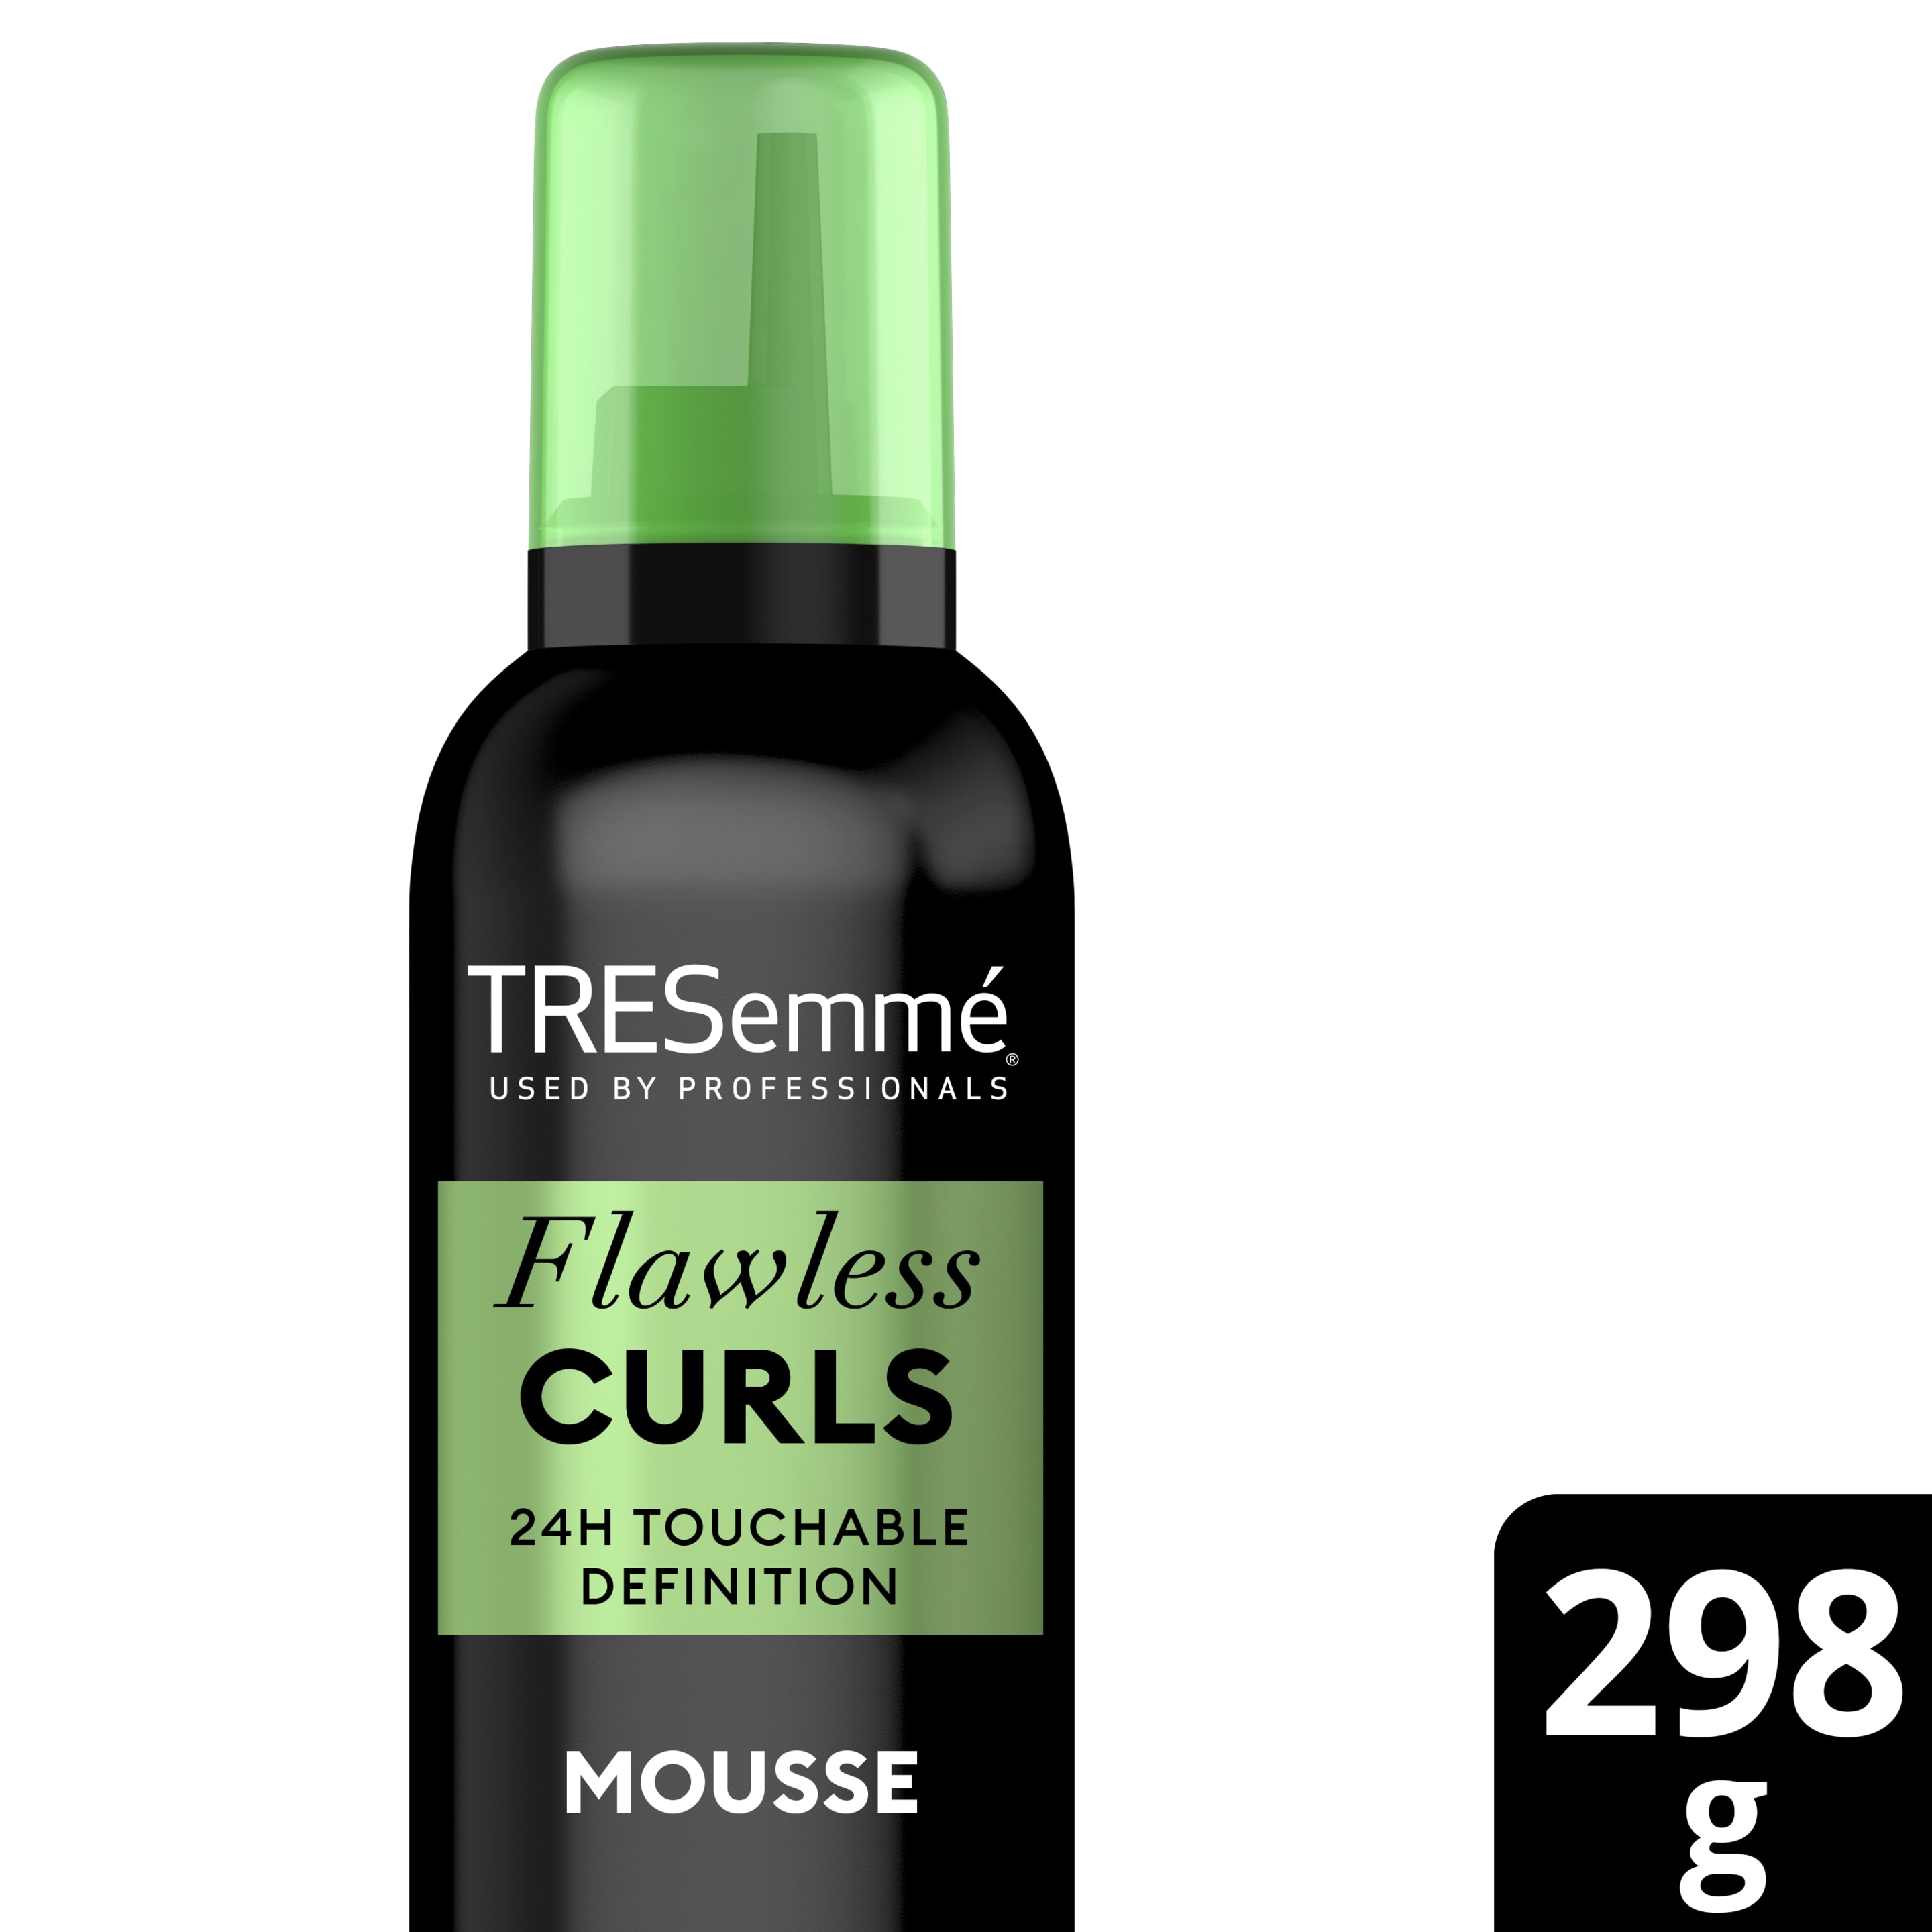 A 298 g bottle of Flawless Curls Mousse hero image